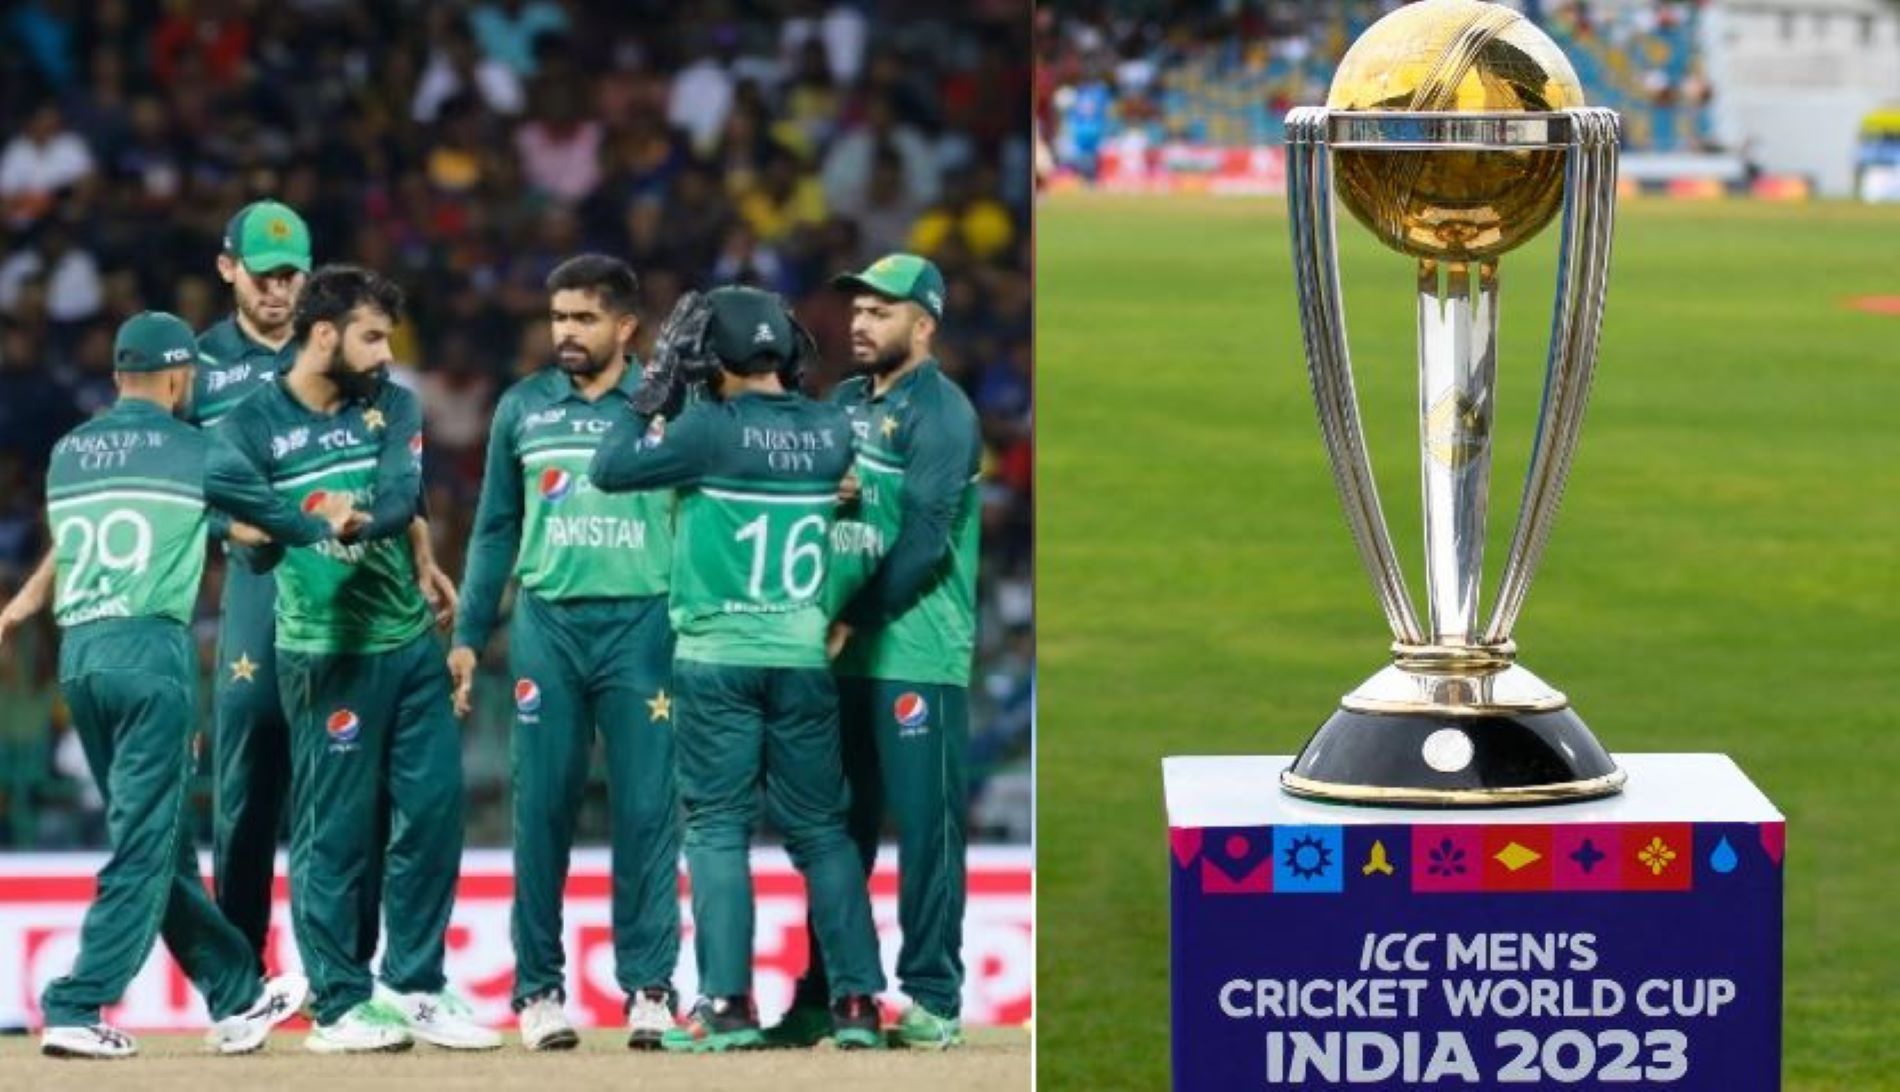 Pakistan will look to win their first ODI World Cup since 1992.